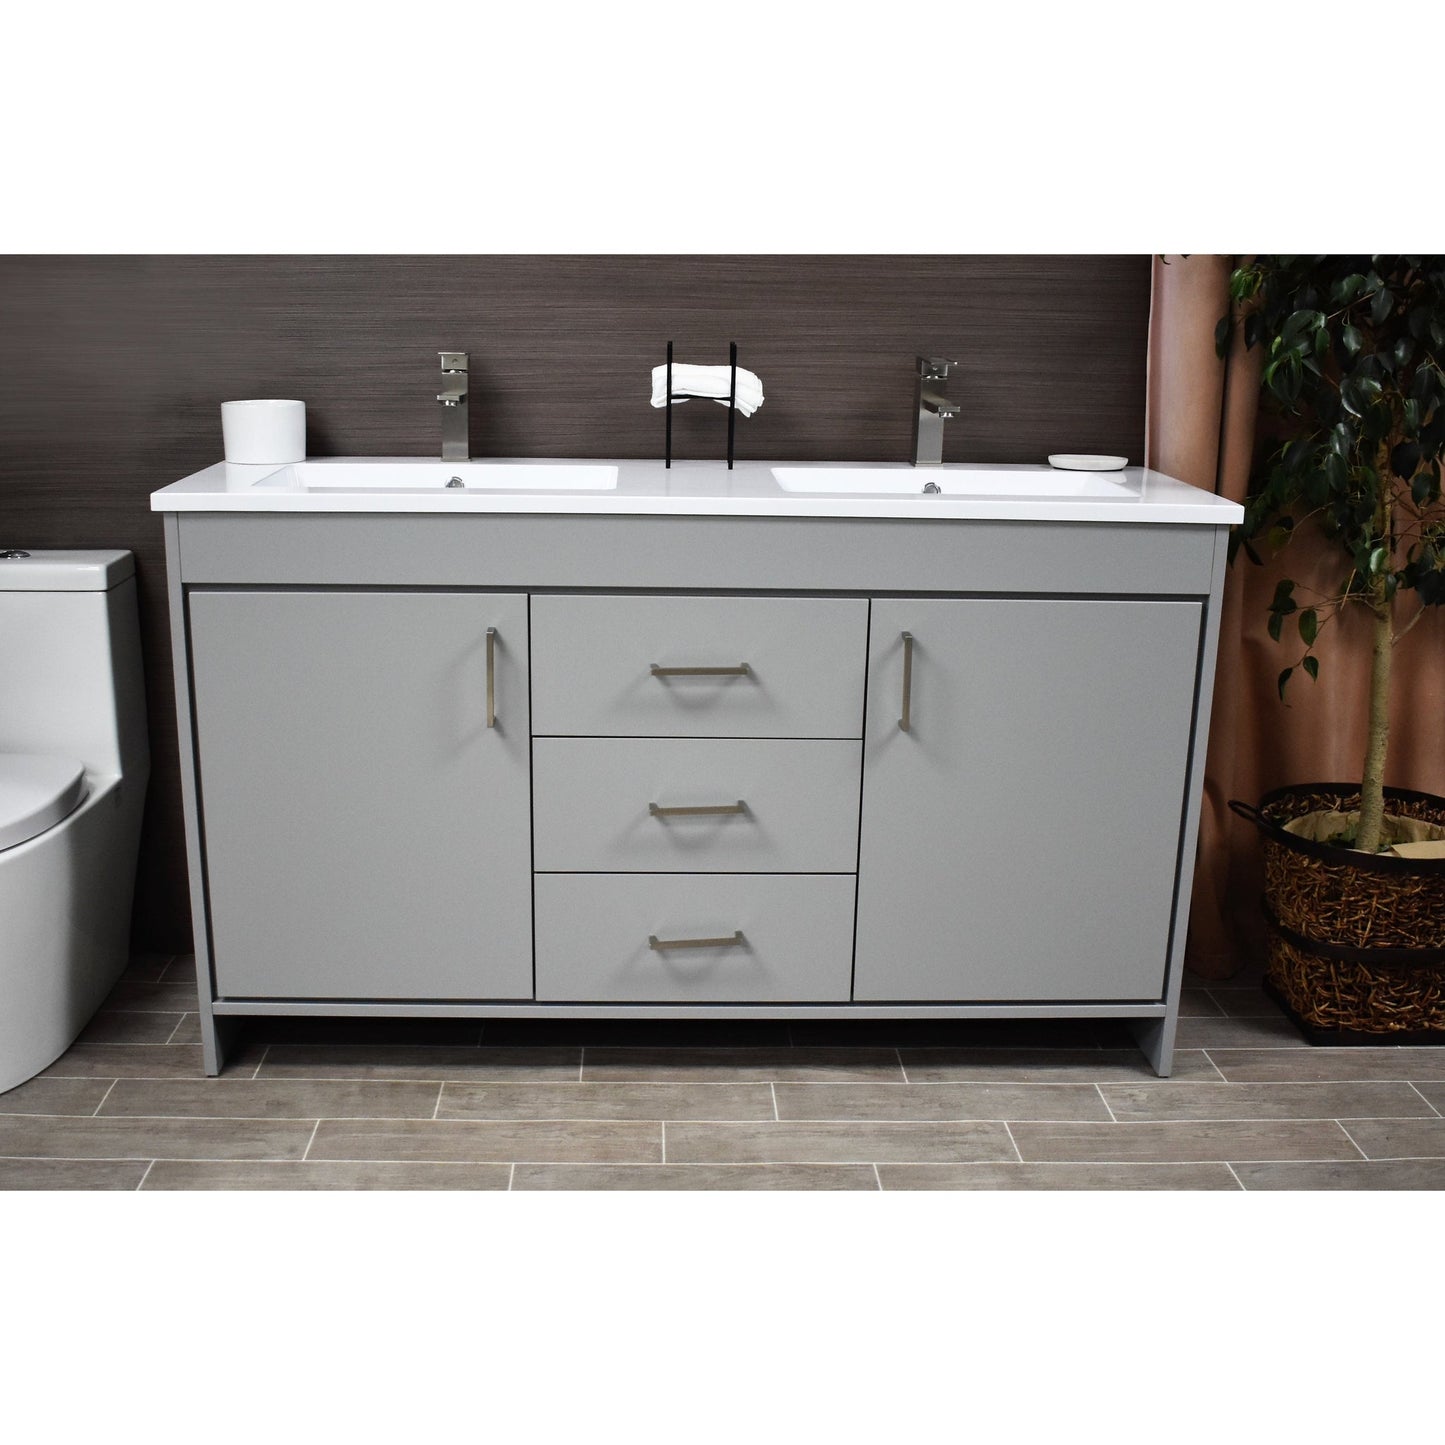 Volpa USA Rio 60" Gray Freestanding Modern Bathroom Vanity With Integrated Acrylic Double Sink Top and Brushed Nickel Handles